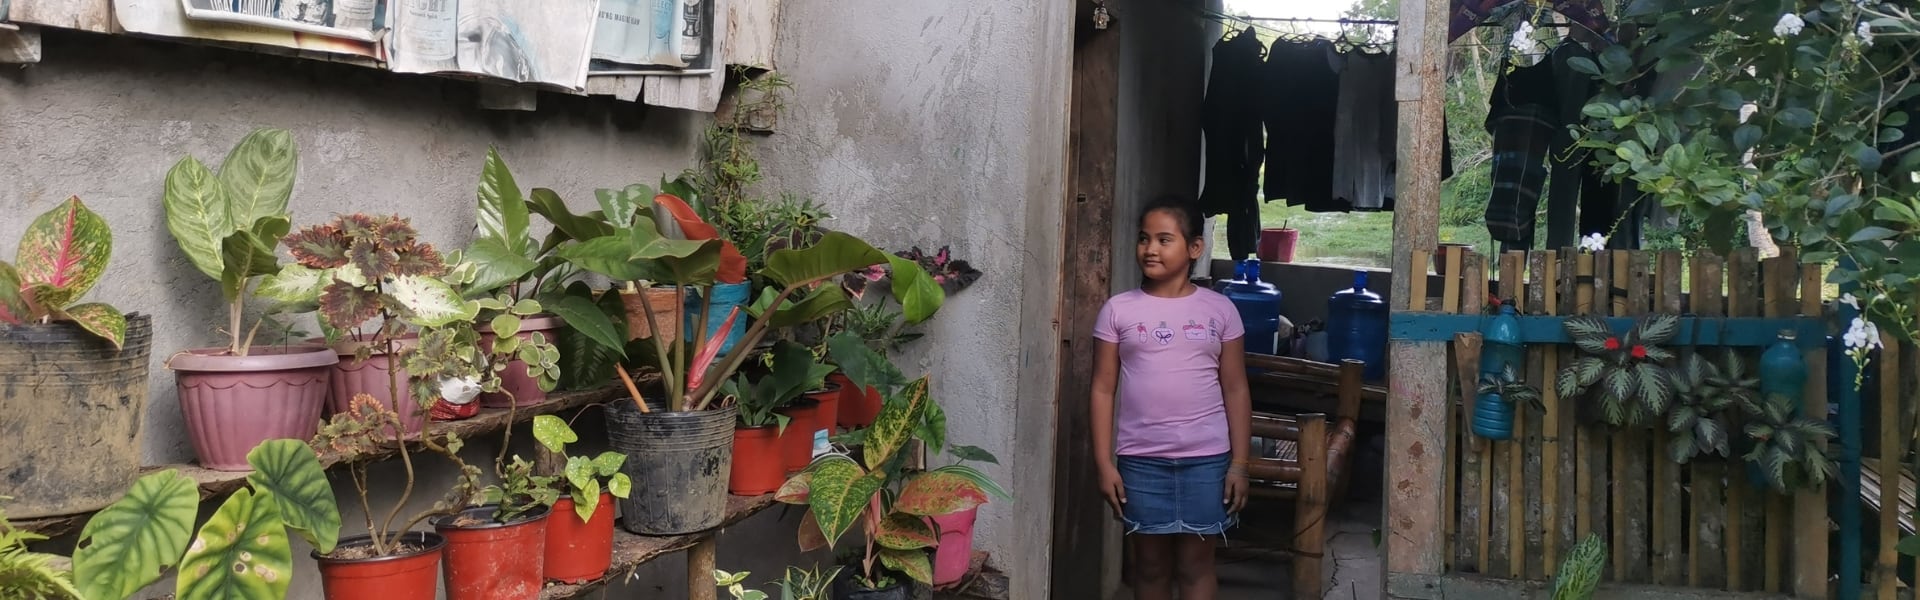 A child standing outside of a house with plants